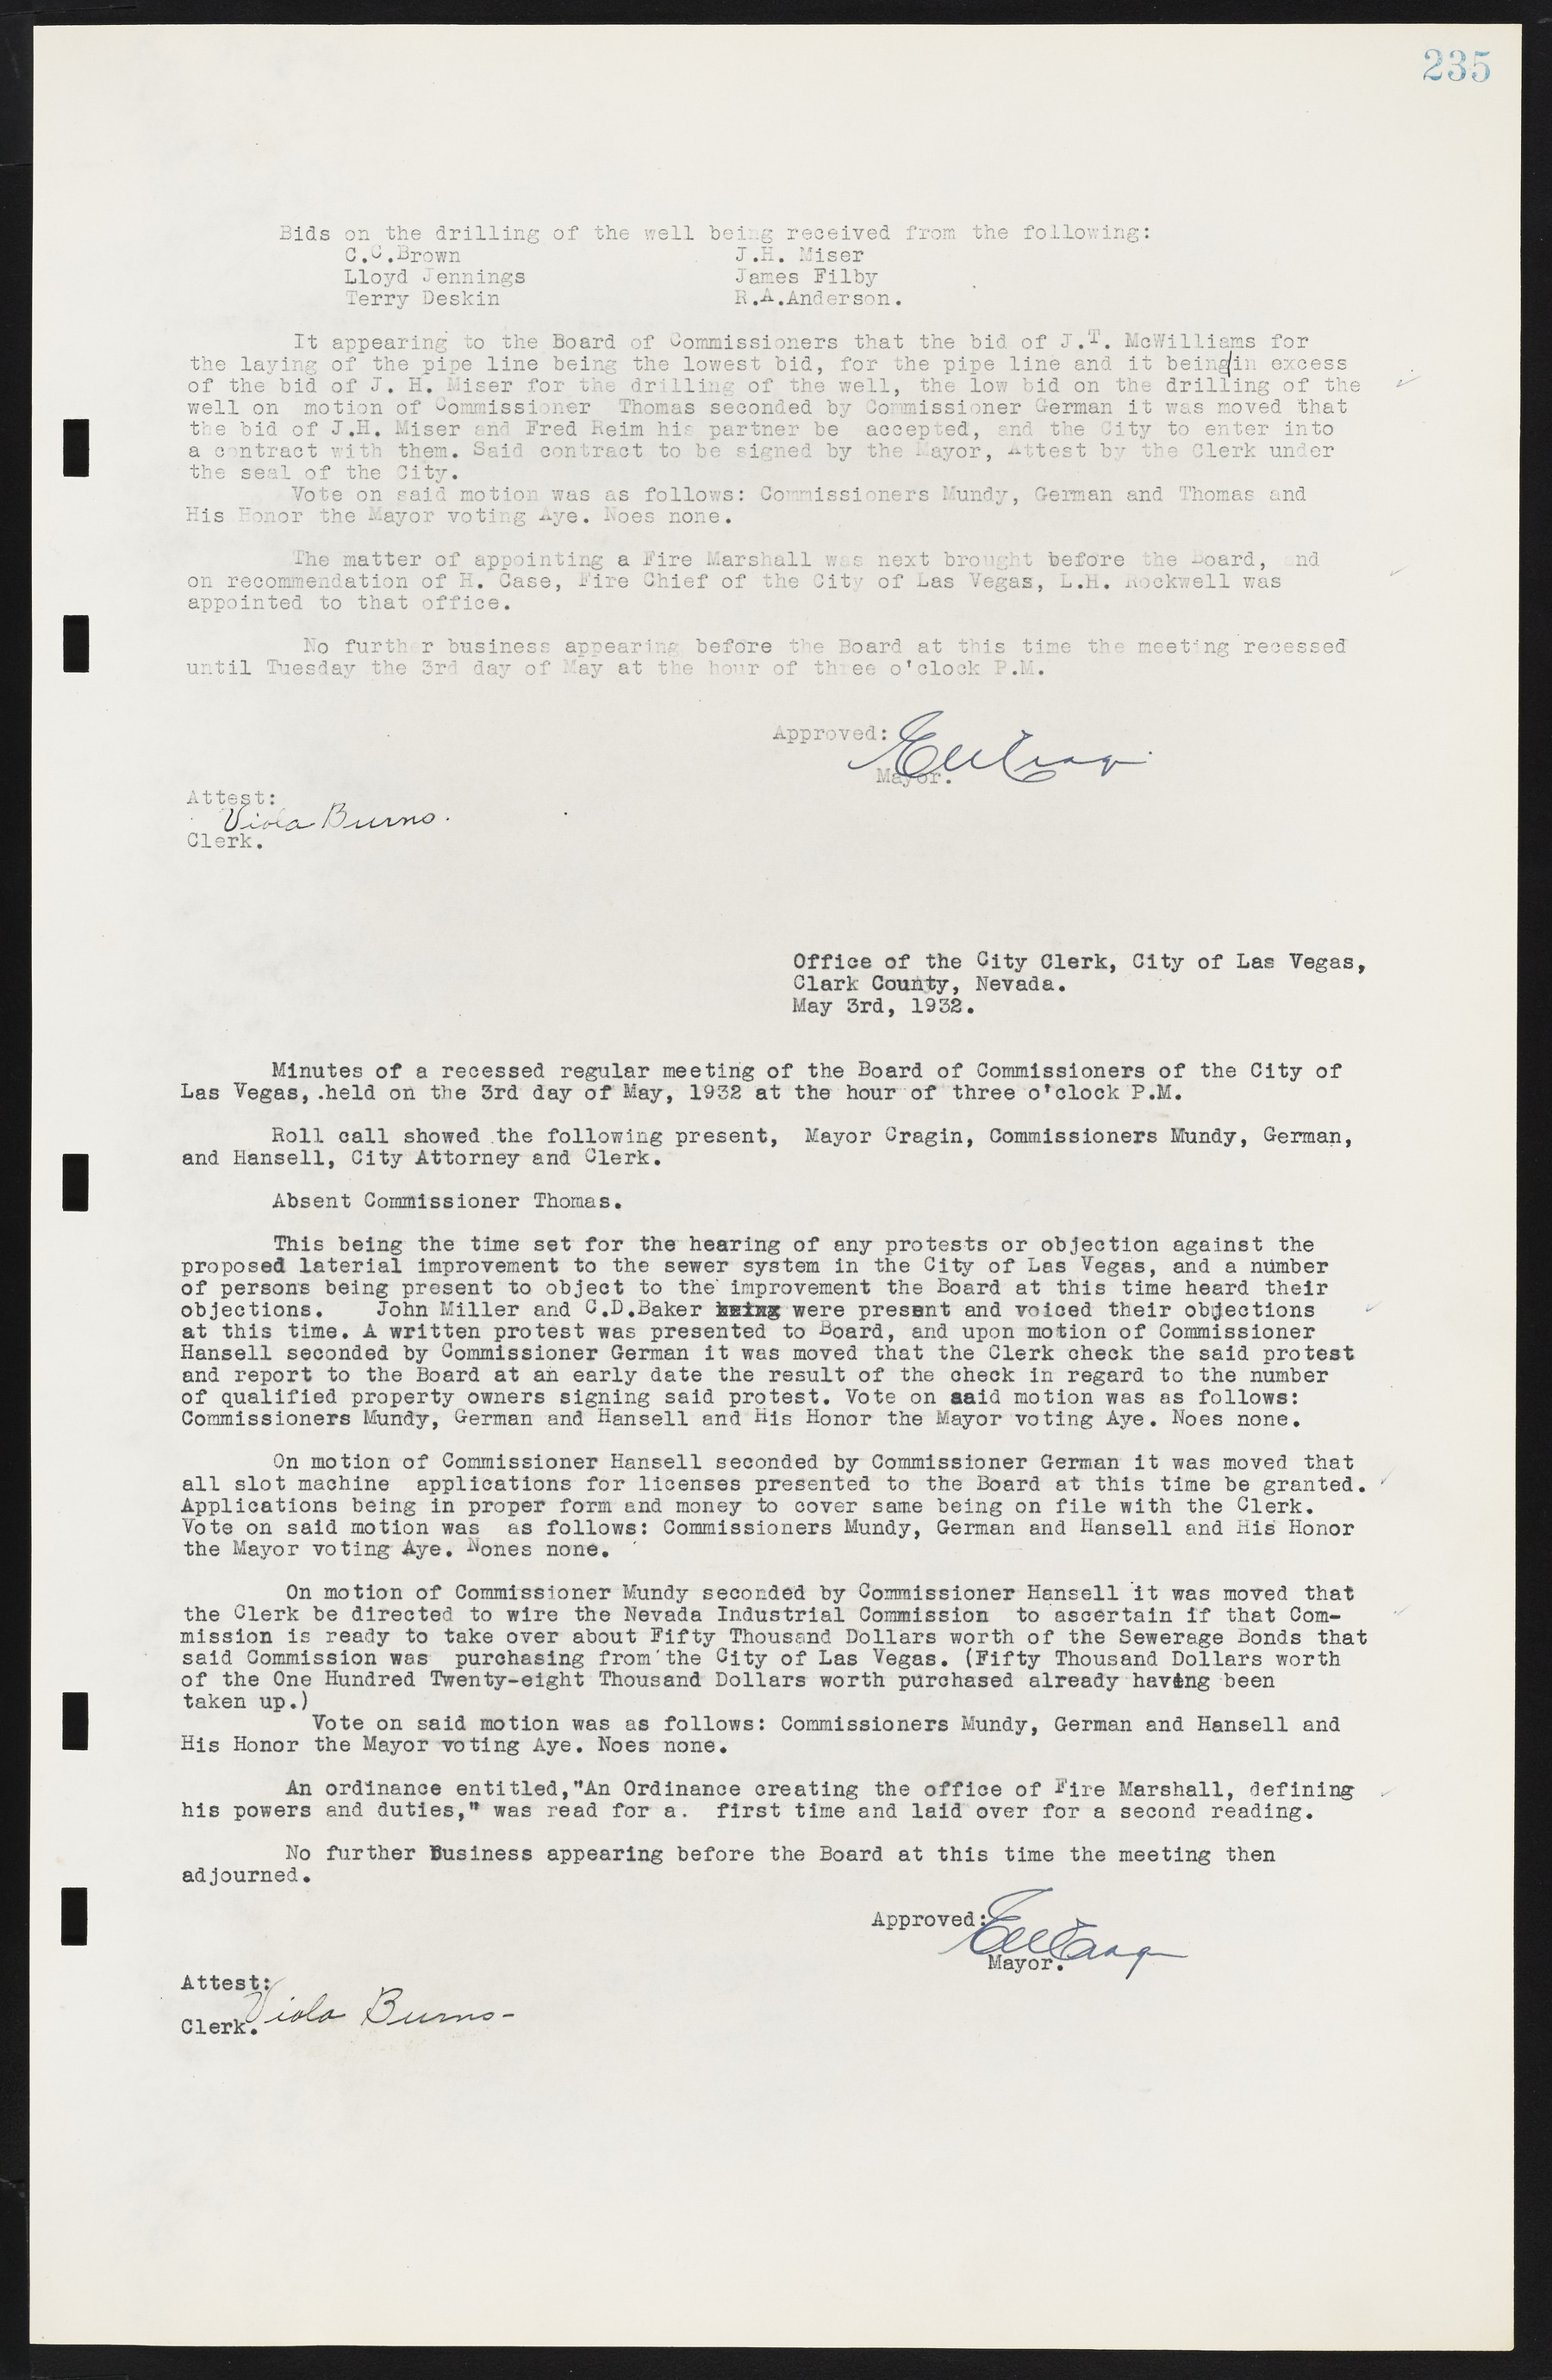 Las Vegas City Commission Minutes, May 14, 1929 to February 11, 1937, lvc000003-241